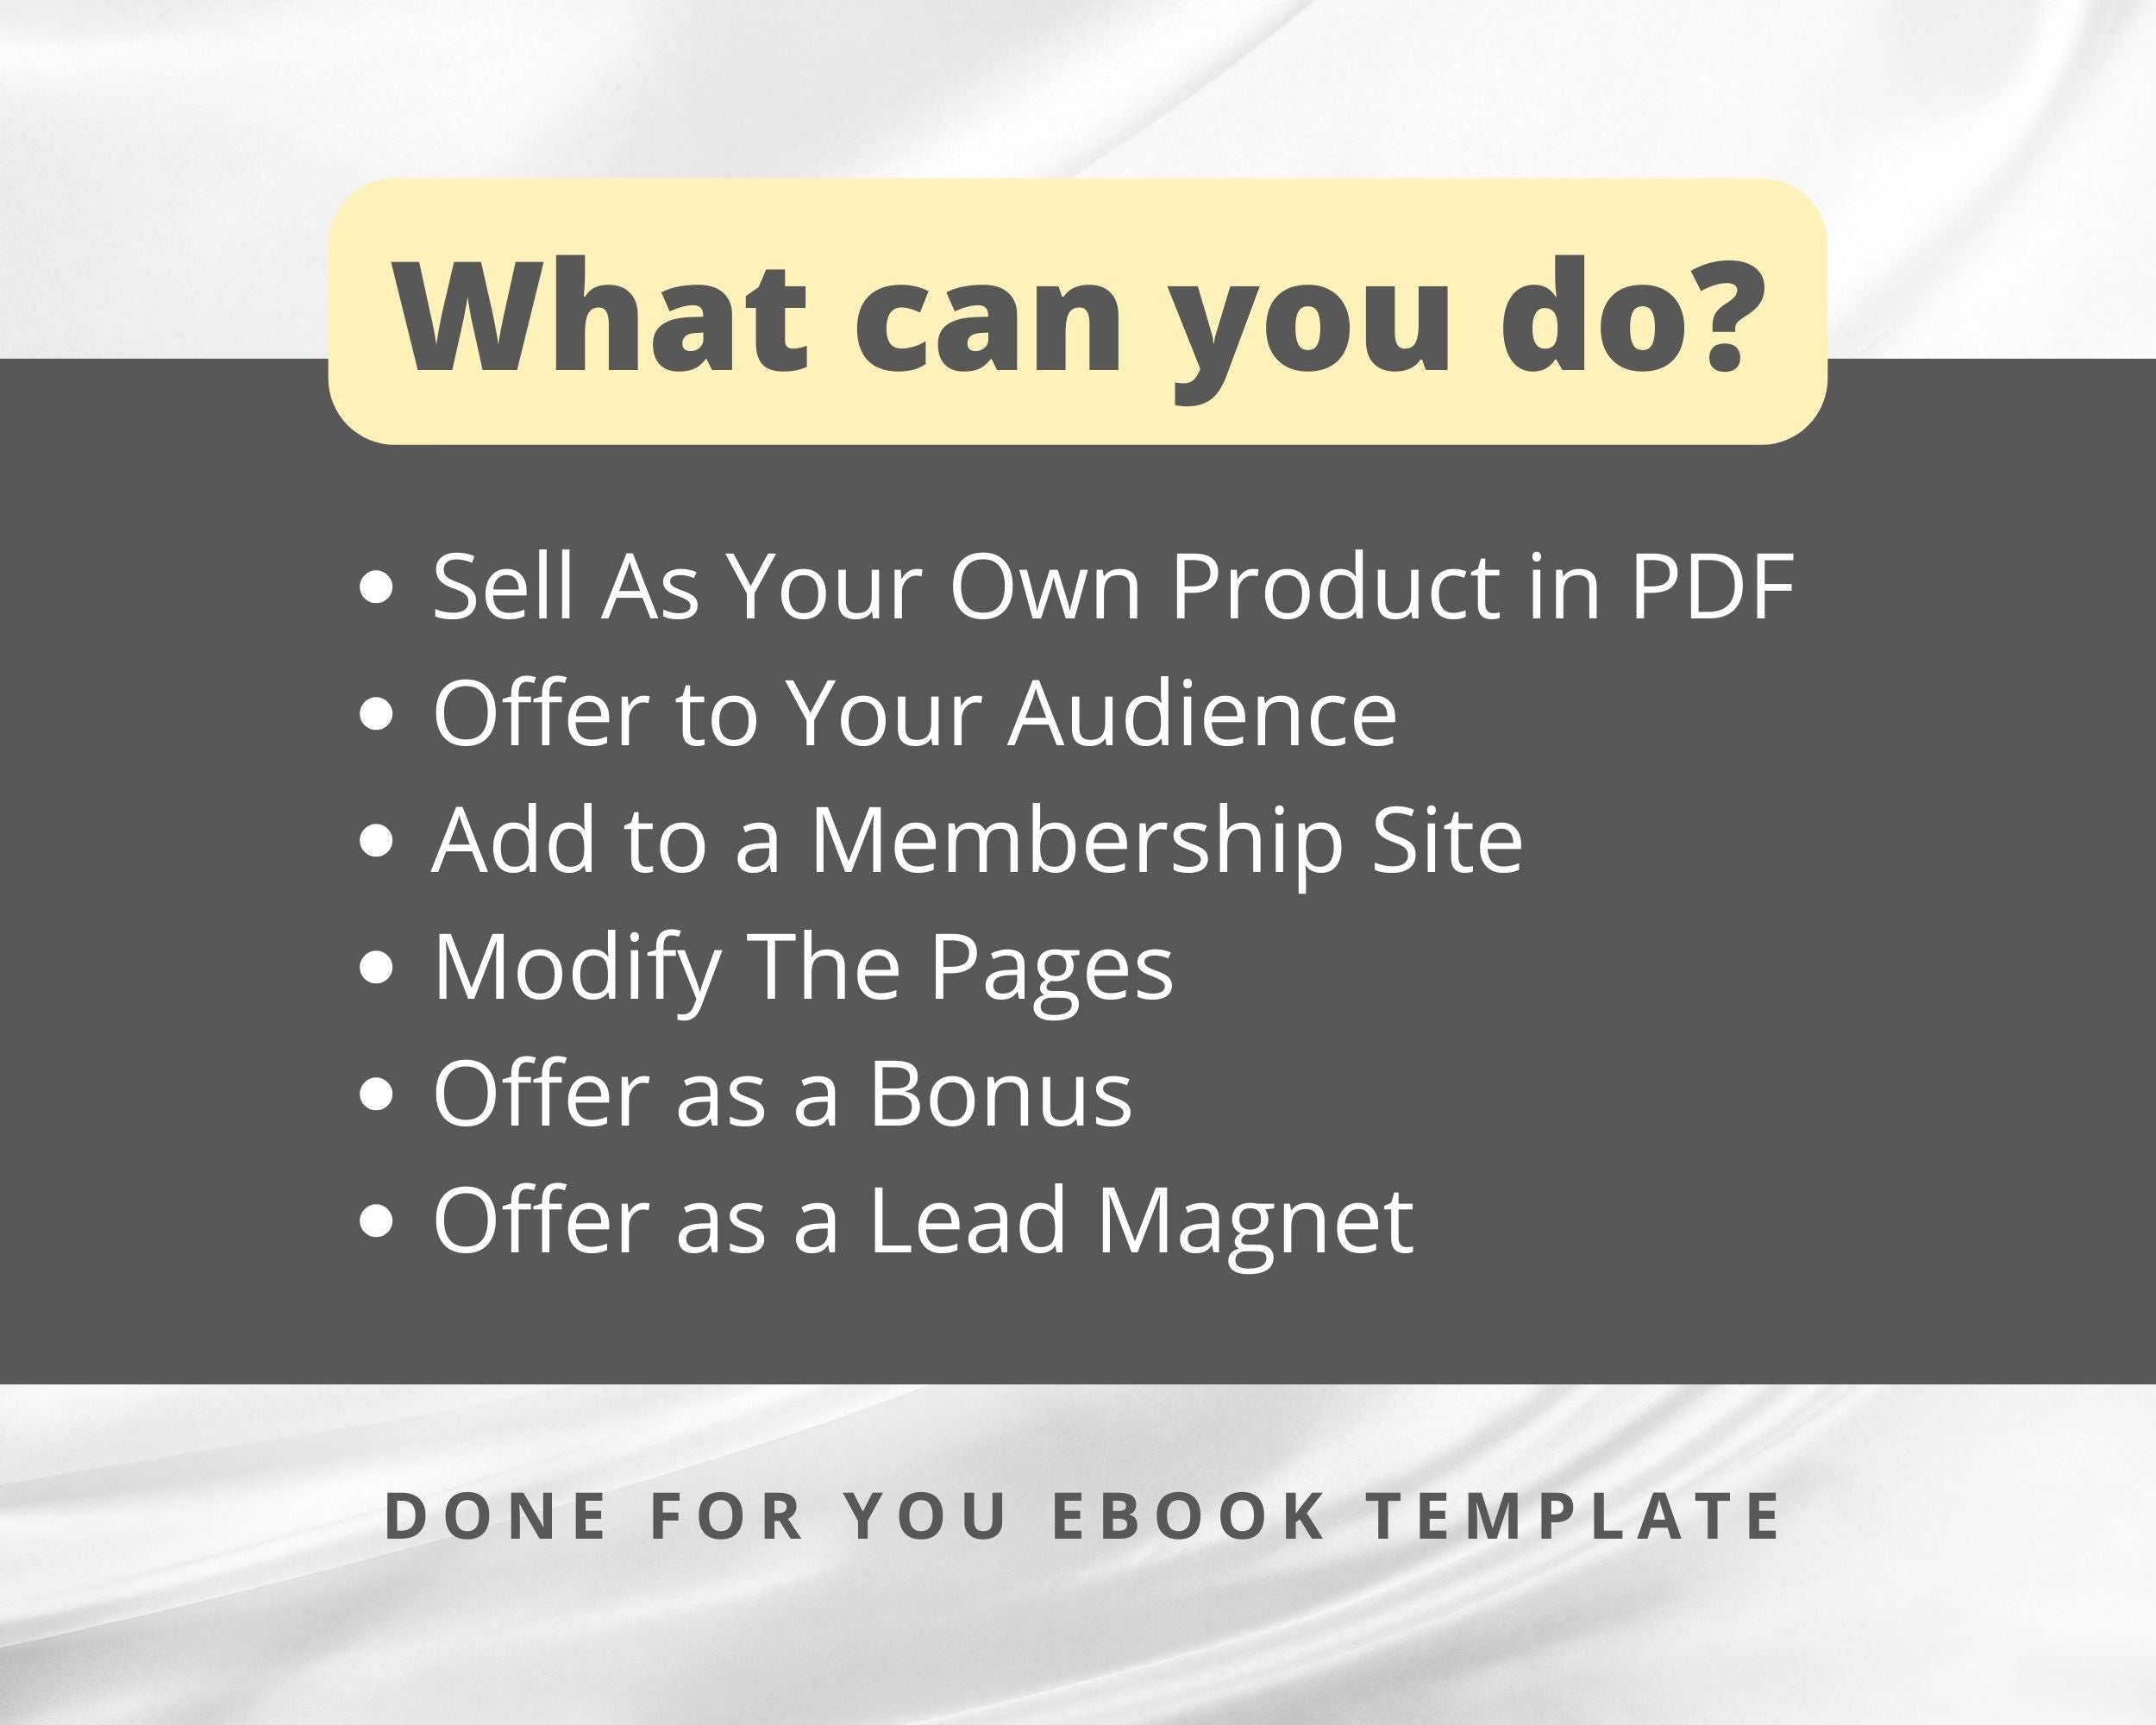 Editable The Life-Changing Magic of Decluttering Ebook | Done-for-You Ebook in Canva | Rebrandable and Resizable Canva Template